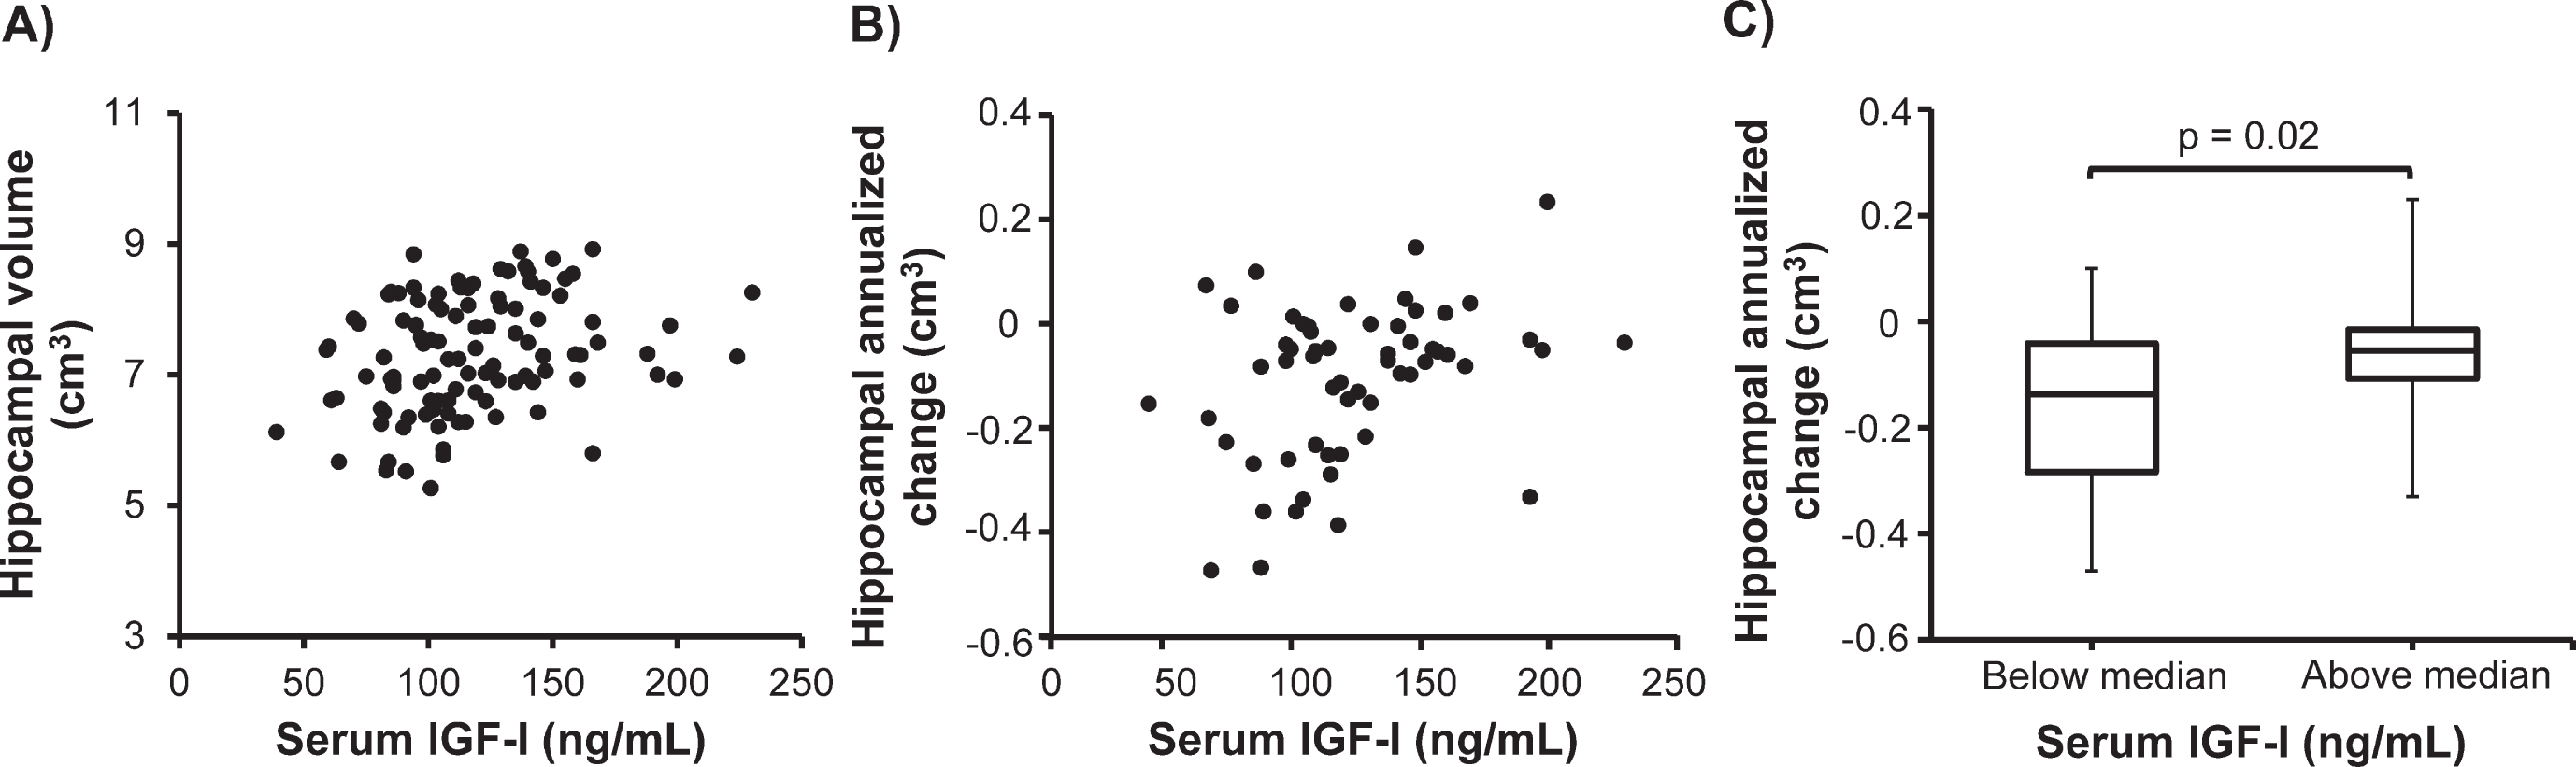 Higher serum insulin-like growth factor-I (IGF-I) concentration is associated with larger hippocampal volume in stable mild cognitive impairment (sMCI). In the sMCI patients, serum IGF-I correlated positively with (A) baseline hippocampal volume (n = 110; rs  = 0.32, p < 0.01) and (B) the annualized change in hippocampal volume (n = 58; rs = 0.32, p = 0.02). C) In the sMCI group (n = 58), patients having serum IGF-I concentrations above the median had a less prominent decrease in hippocampal volume during the follow-up than those having serum IGF-I below the median (p = 0.02). Data in the box plots are presented as medians (horizontal lines), 25th–75th percentiles (boxes), and ranges (whiskers). Correlations were sought using the Spearman rank order correlation test and between-group differences were investigated using the Mann-Whitney U test.